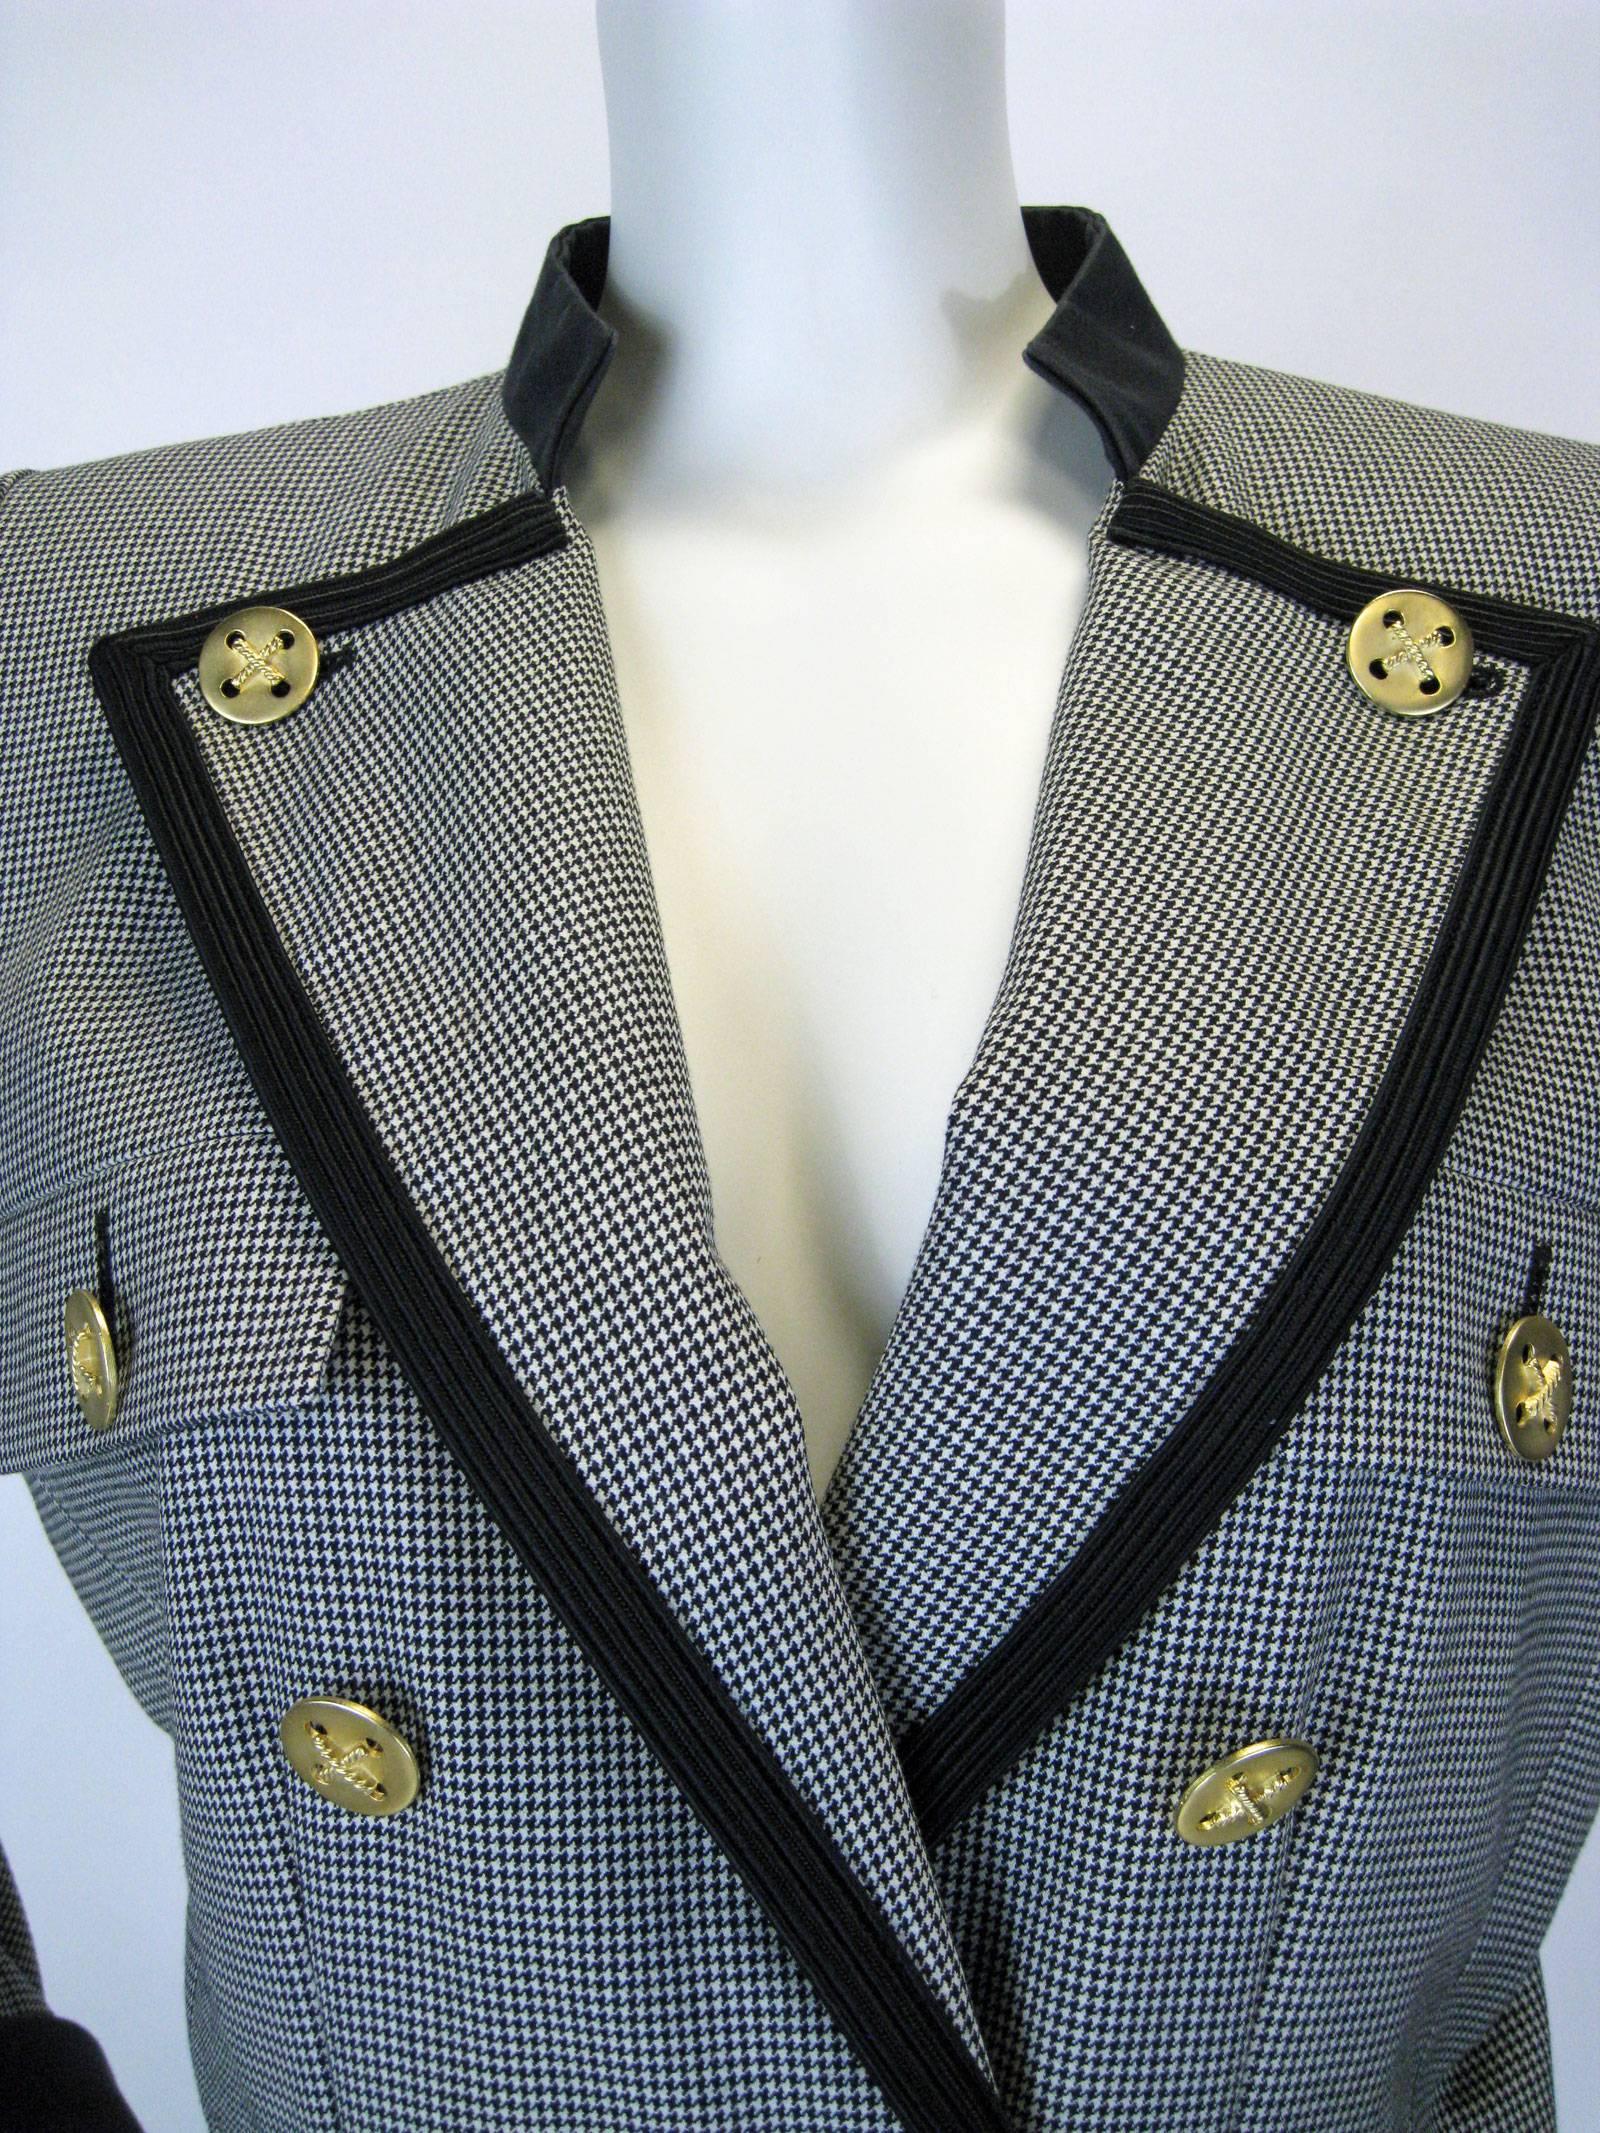 Black and white herringbone YSL Rive Gauche jacket.
Military inspired double breasted with black trim and gold buttons.
Button details on cuffs.
Faux chest and hip pockets.
Fully lined.
Tagged a size 40.

